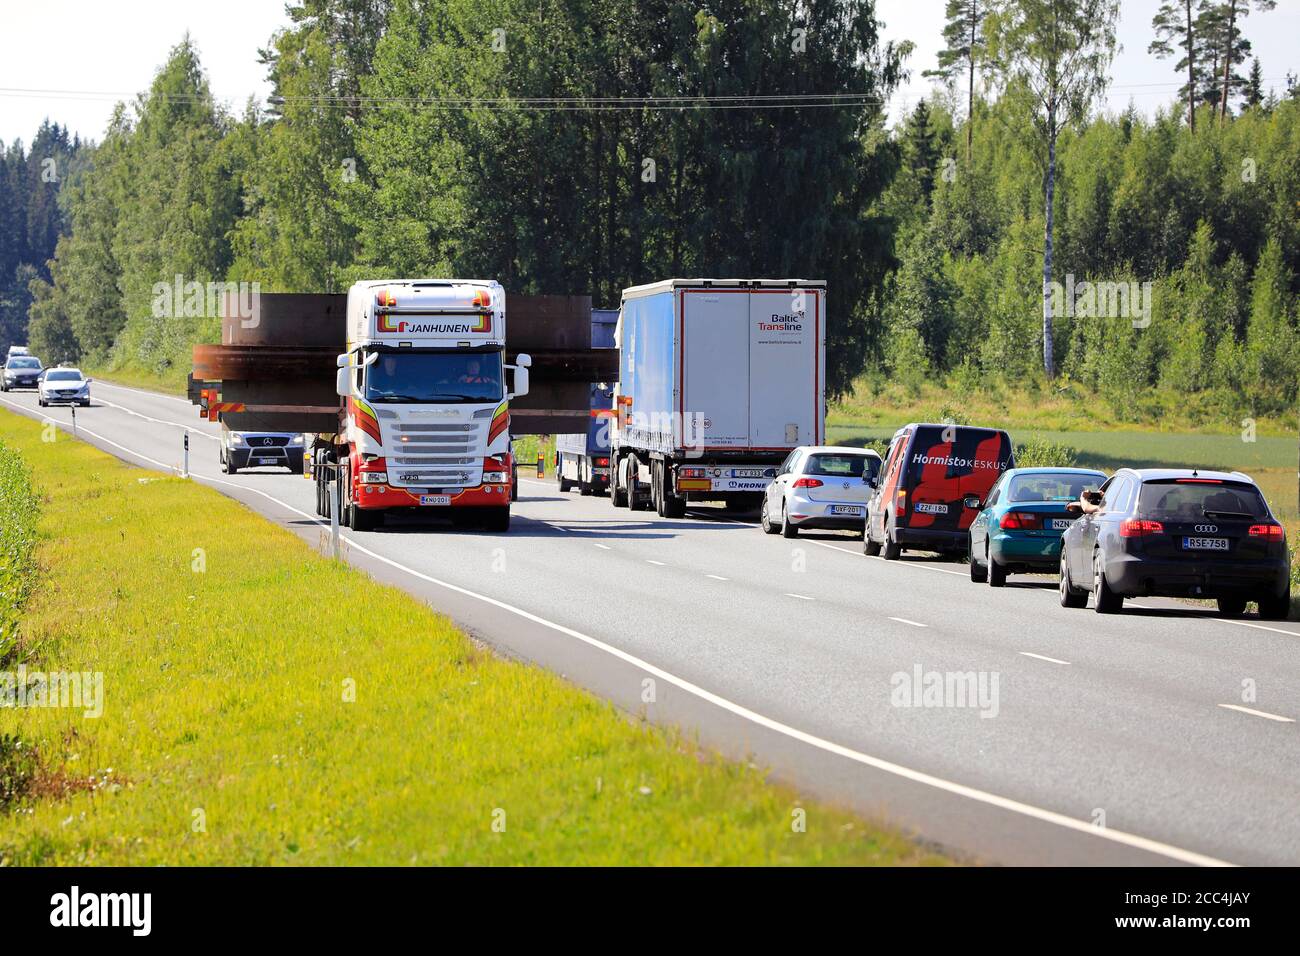 Traffic from opposite direction giving way to 7,1 metres wide oversize load transport by semi trailer of Janhunen. Urjala, Finland. August 14, 2020. Stock Photo